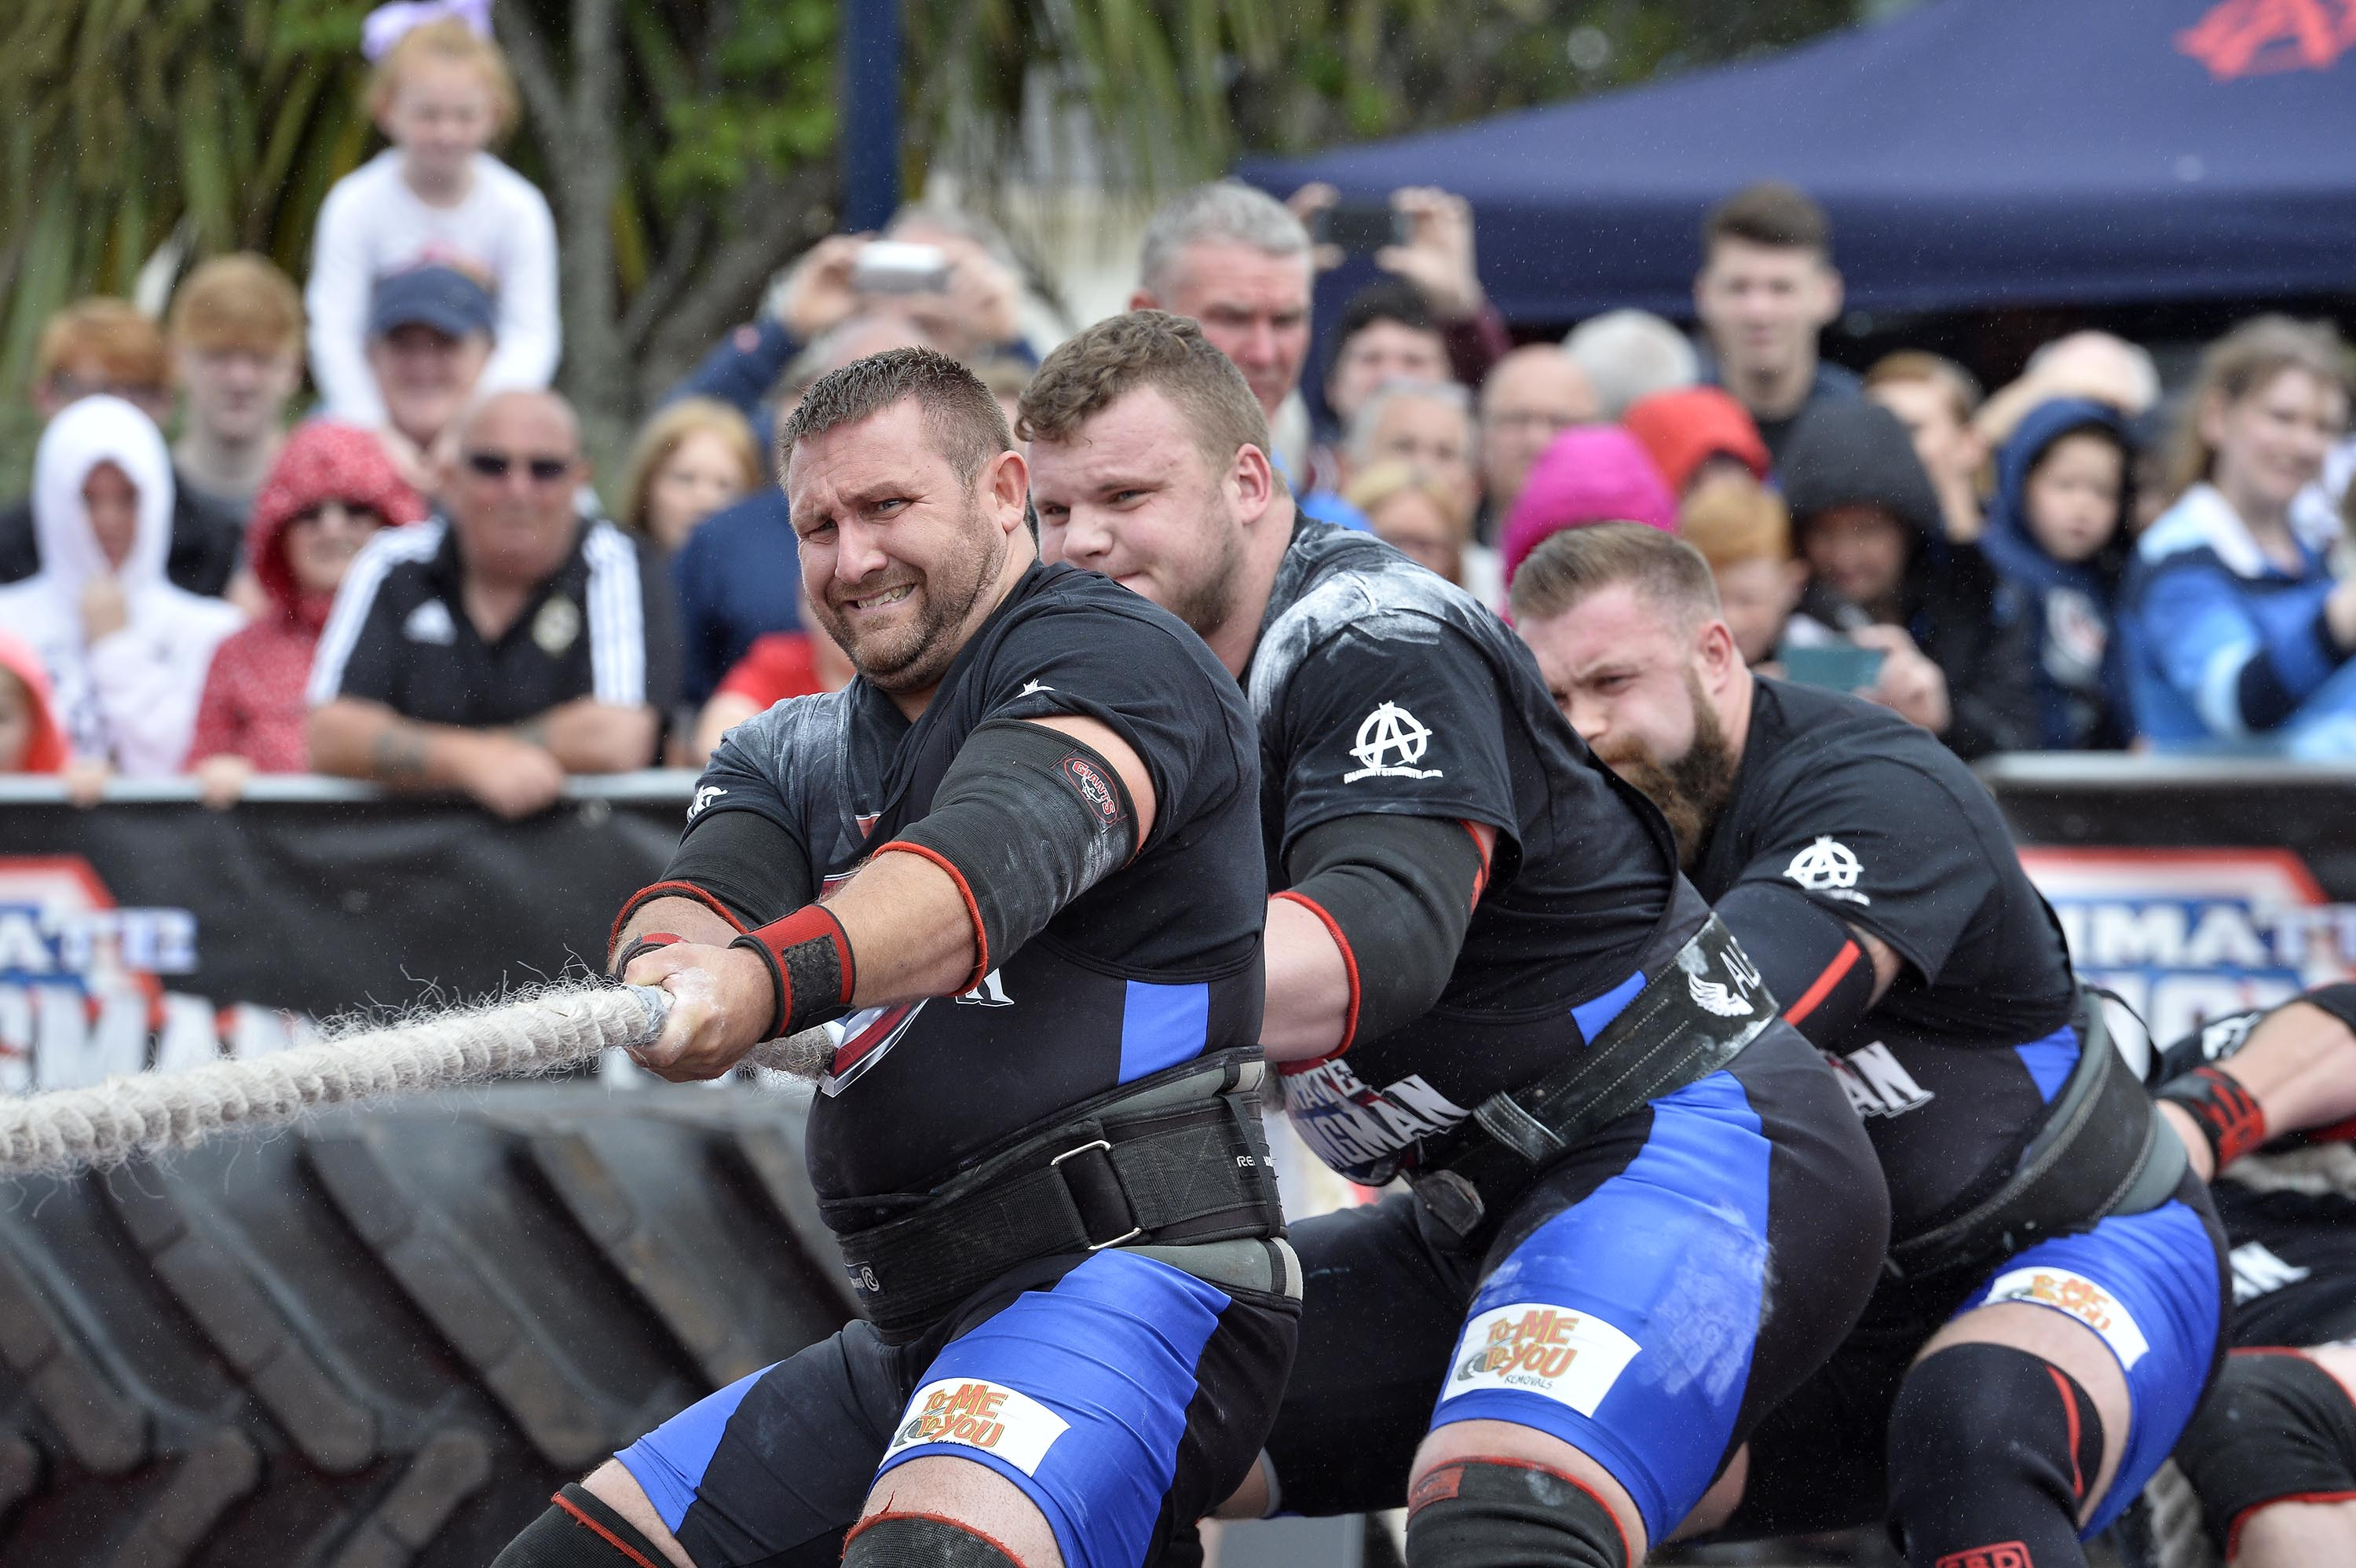 Team Scotland in action in the Tug Of War. Ultimate Strongman Battle of Britain.